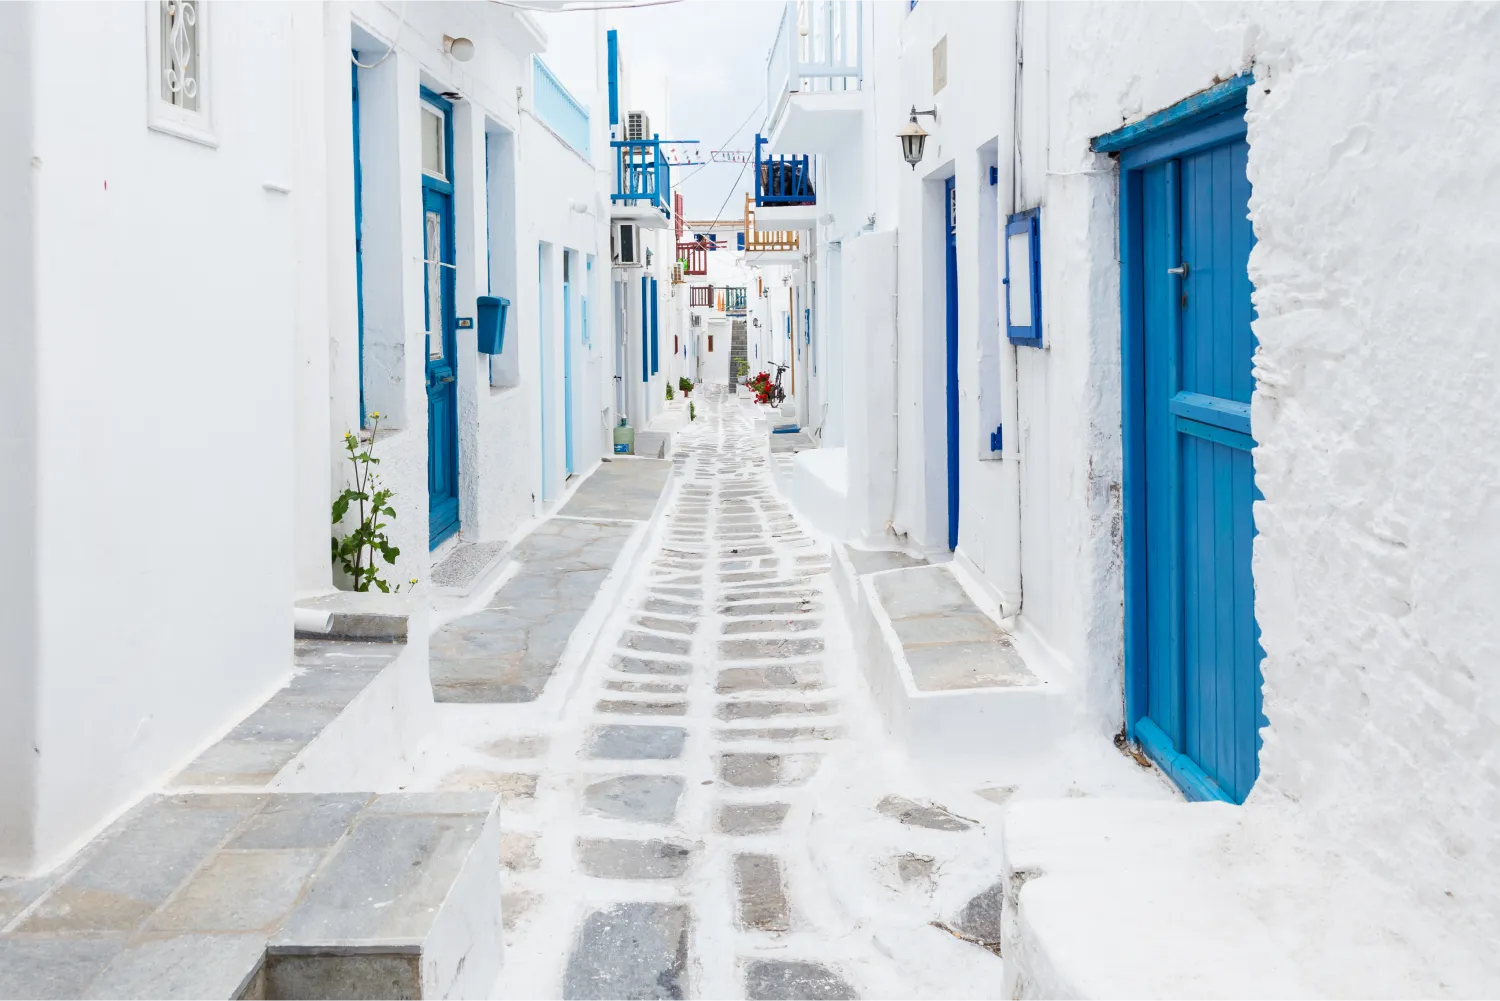 The whitewashed buildings and narrow streets in the town of Mykonos